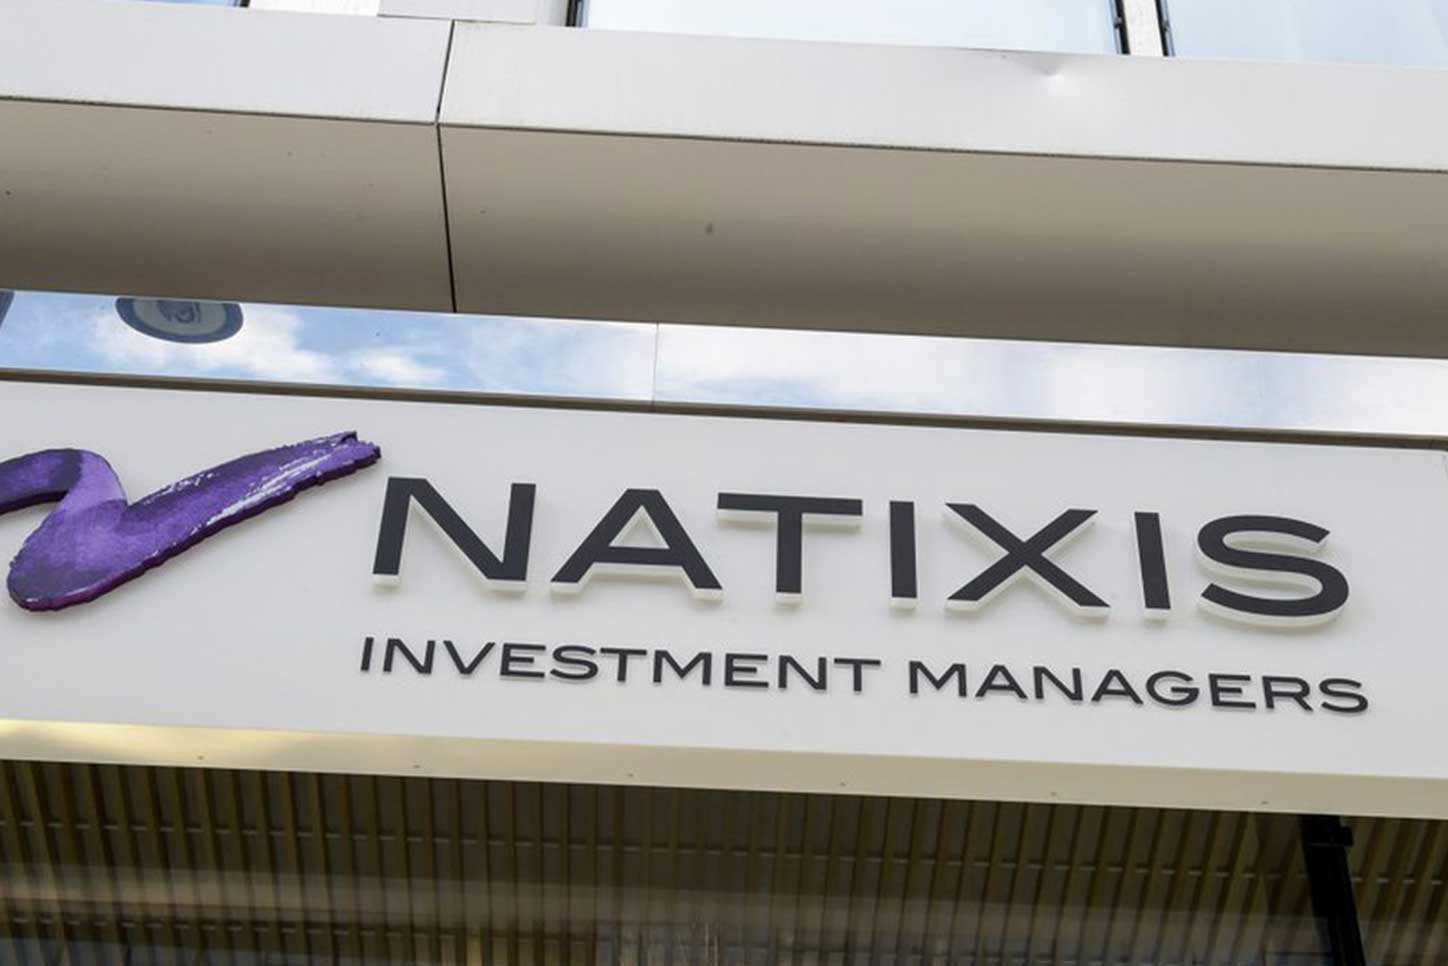 financialounge -  Claire Martinetto Mabrouk Chetouane Natixis Investment Managers